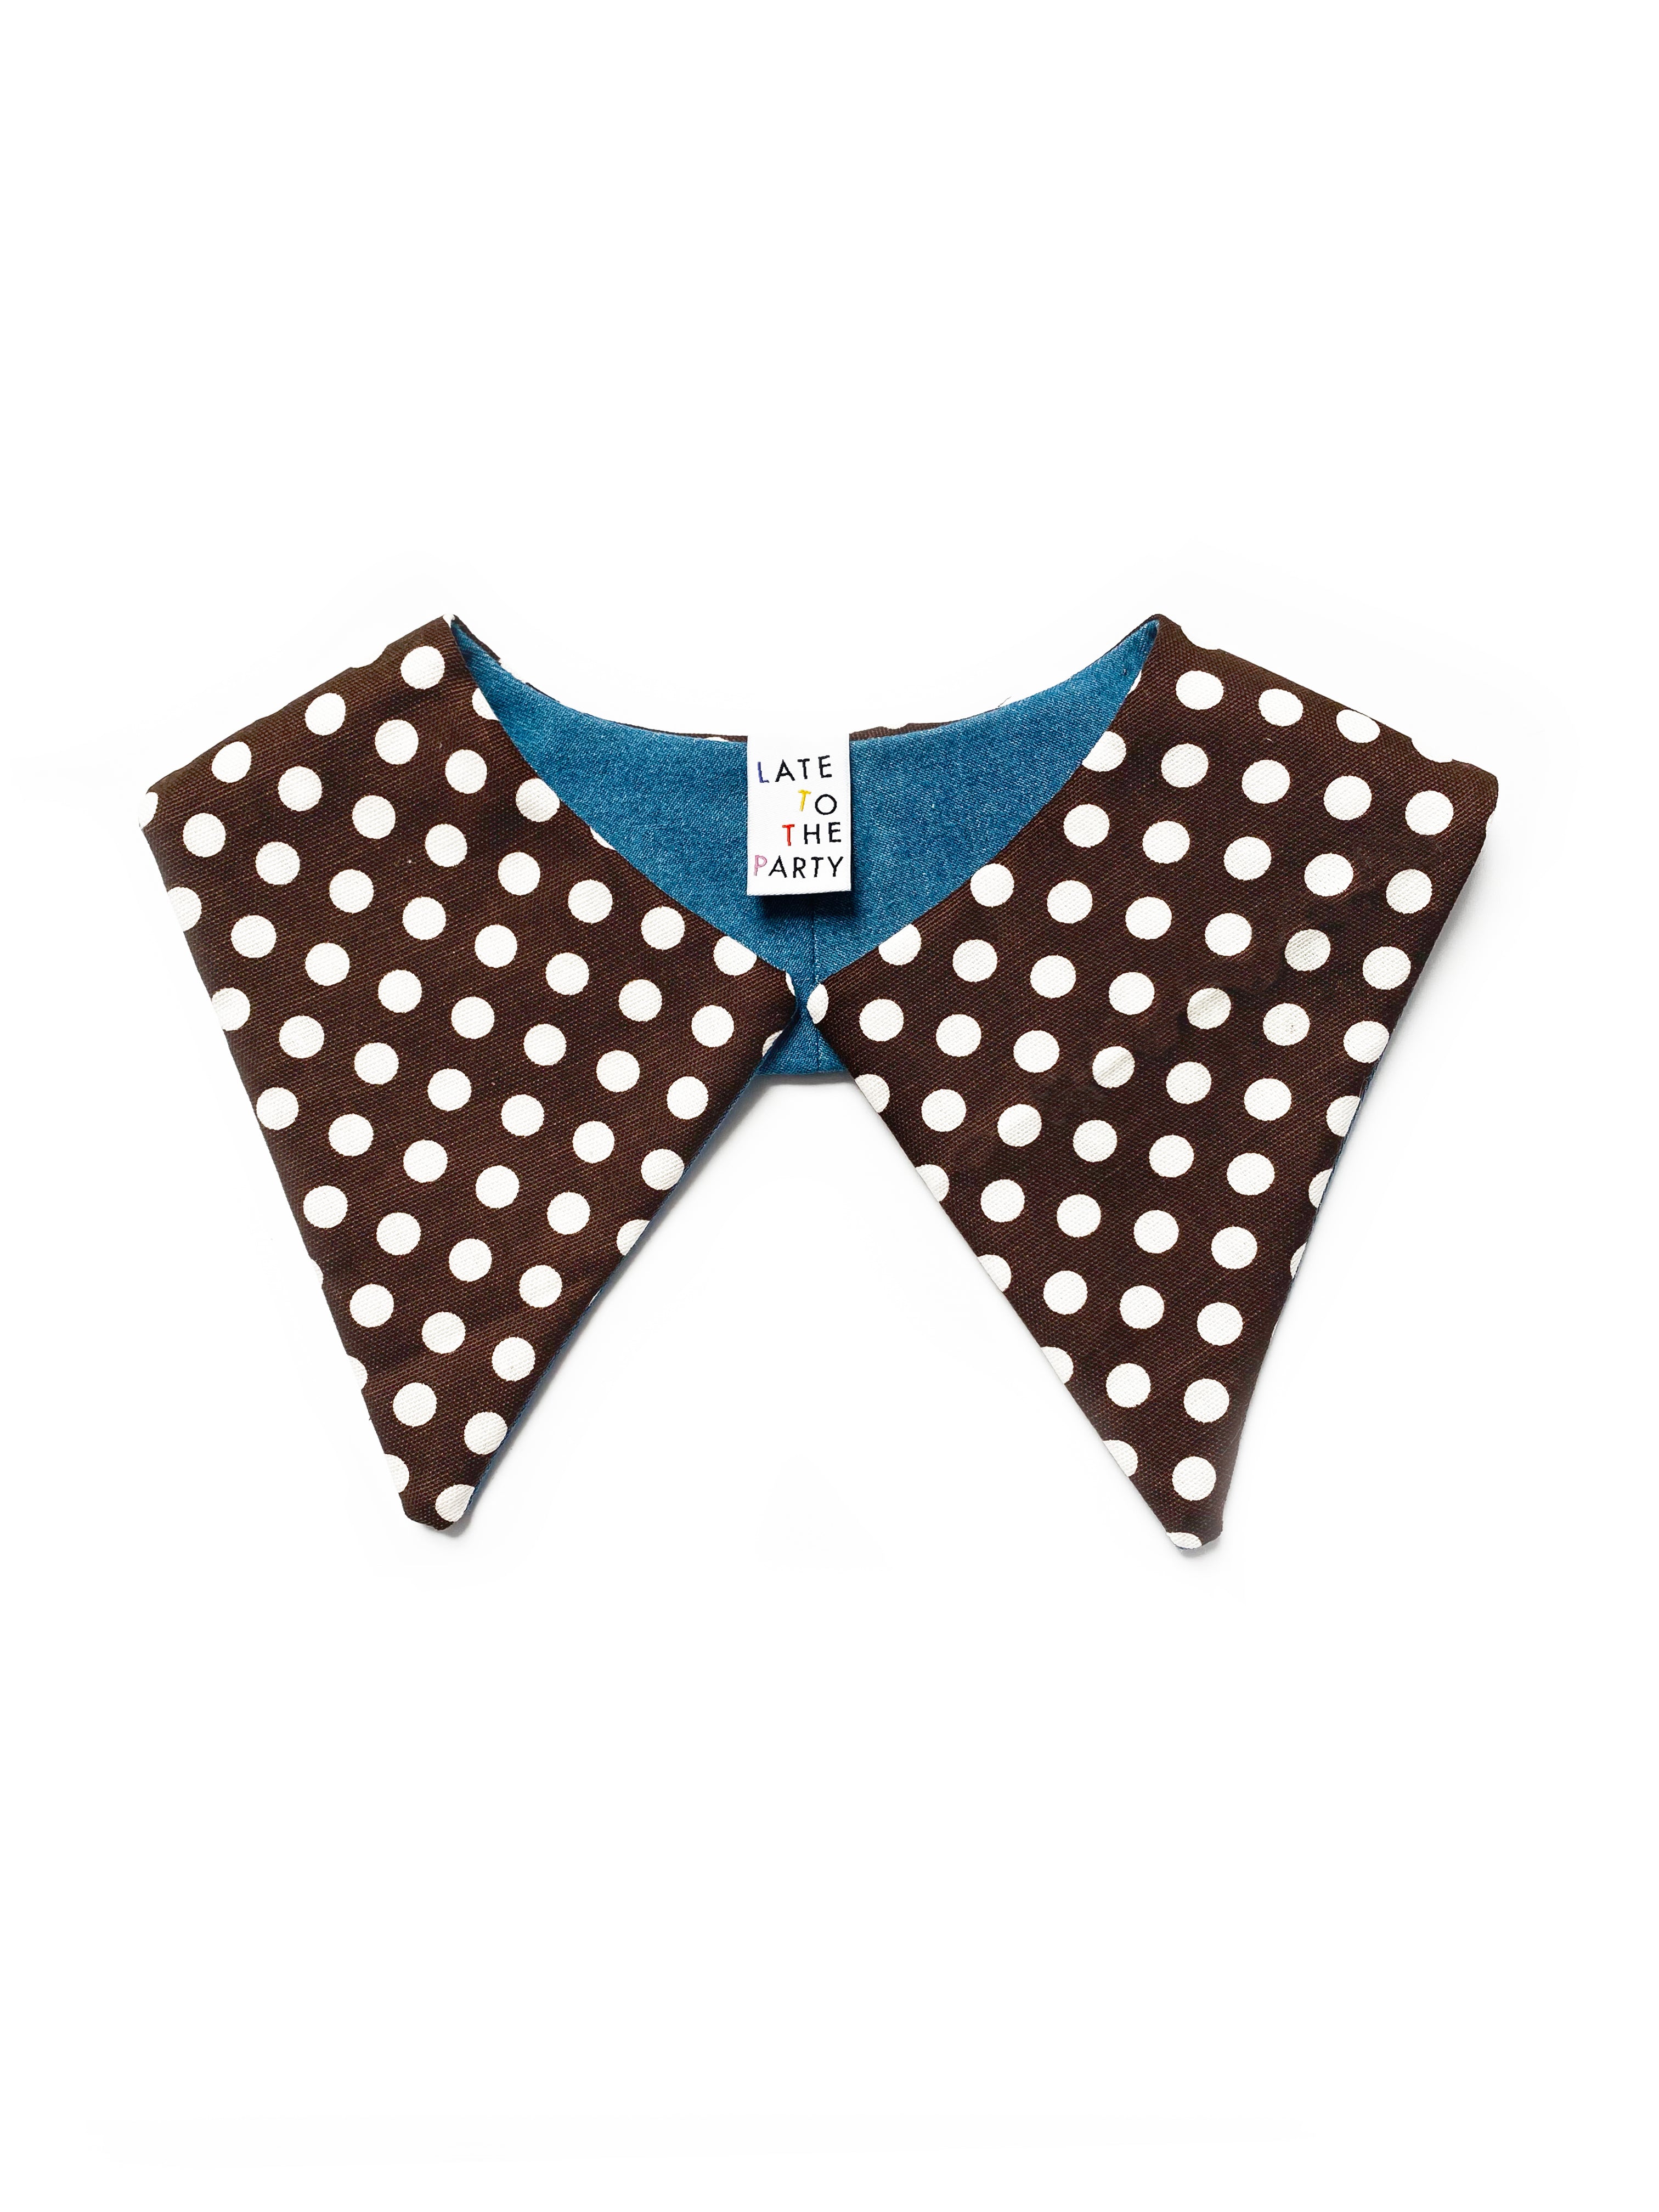 "Polka Dot Brown" Detachable Collar - Late to the Party